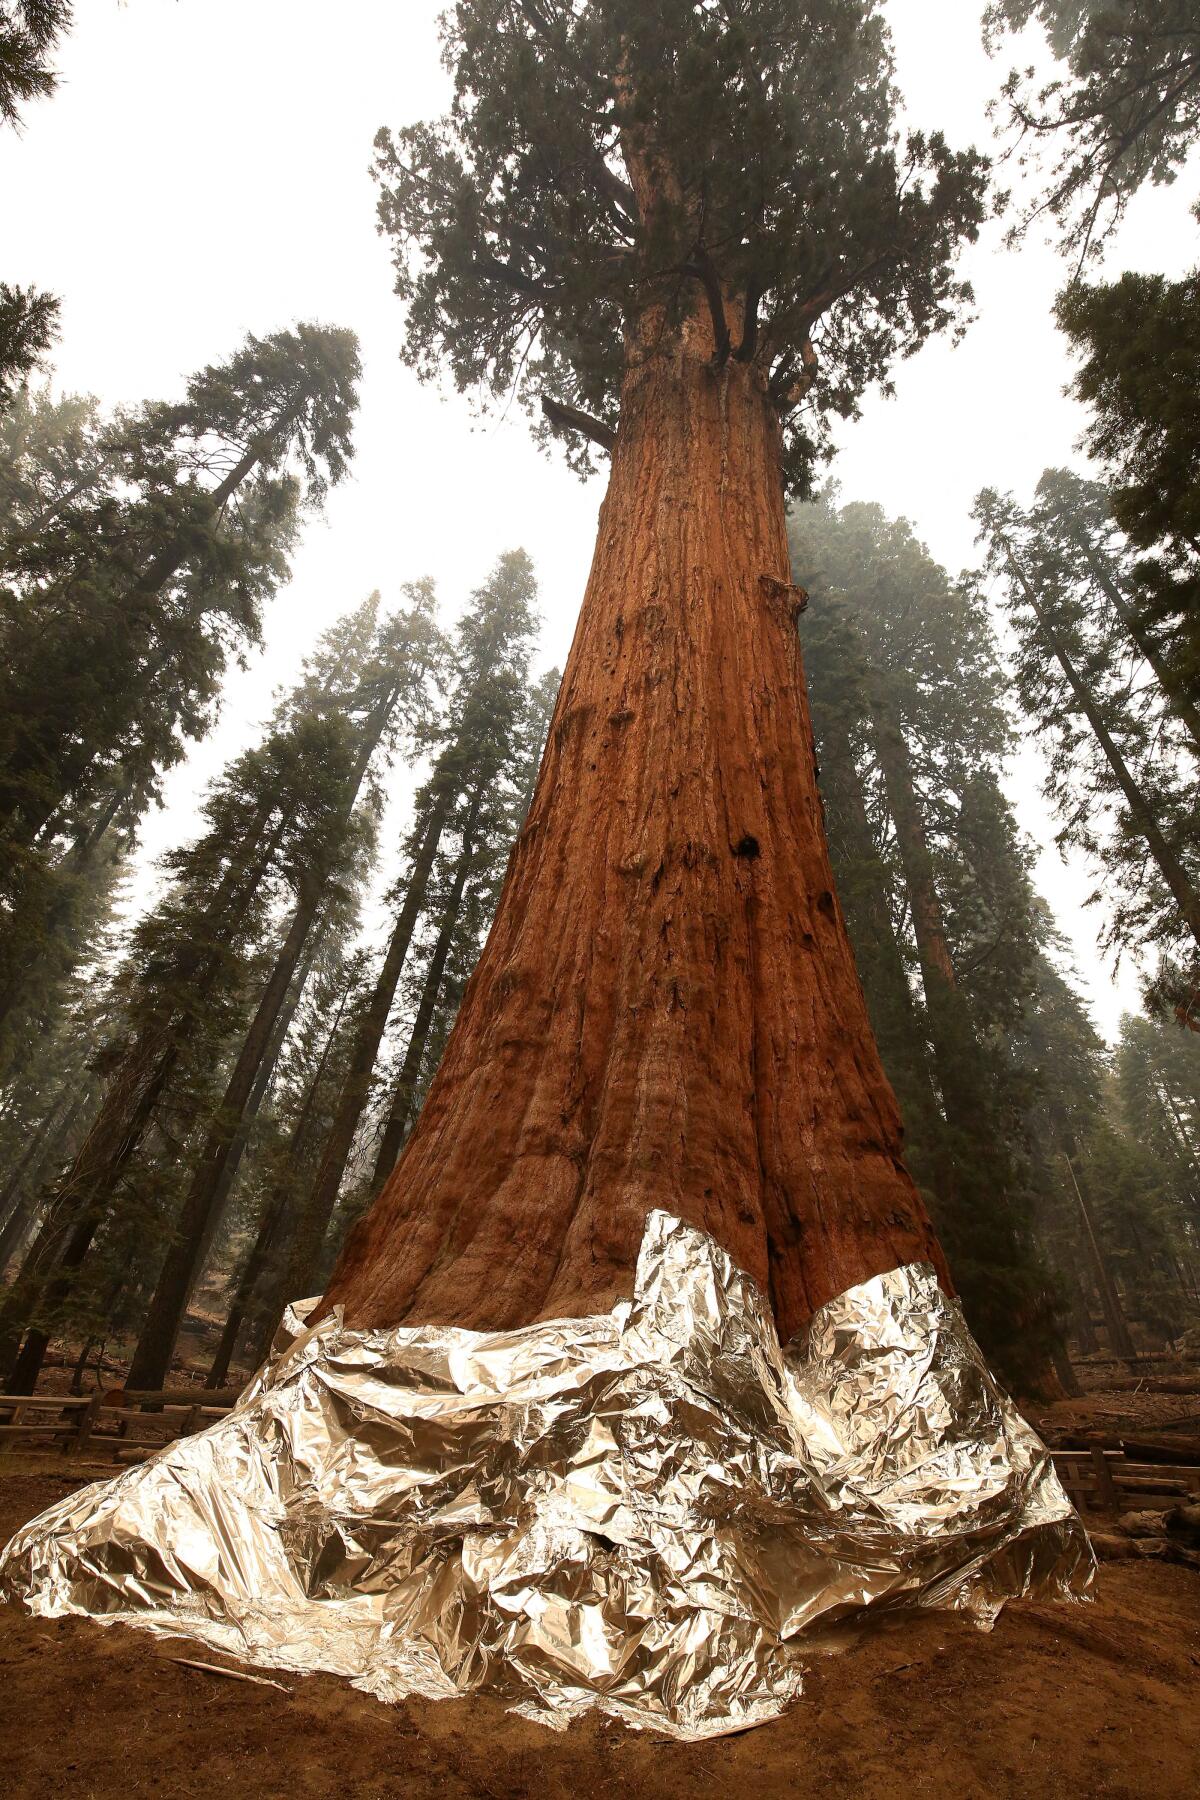 The General Sherman tree in Sequoia National Park with protective wrapping on its base to save it from a nearby wildfire.